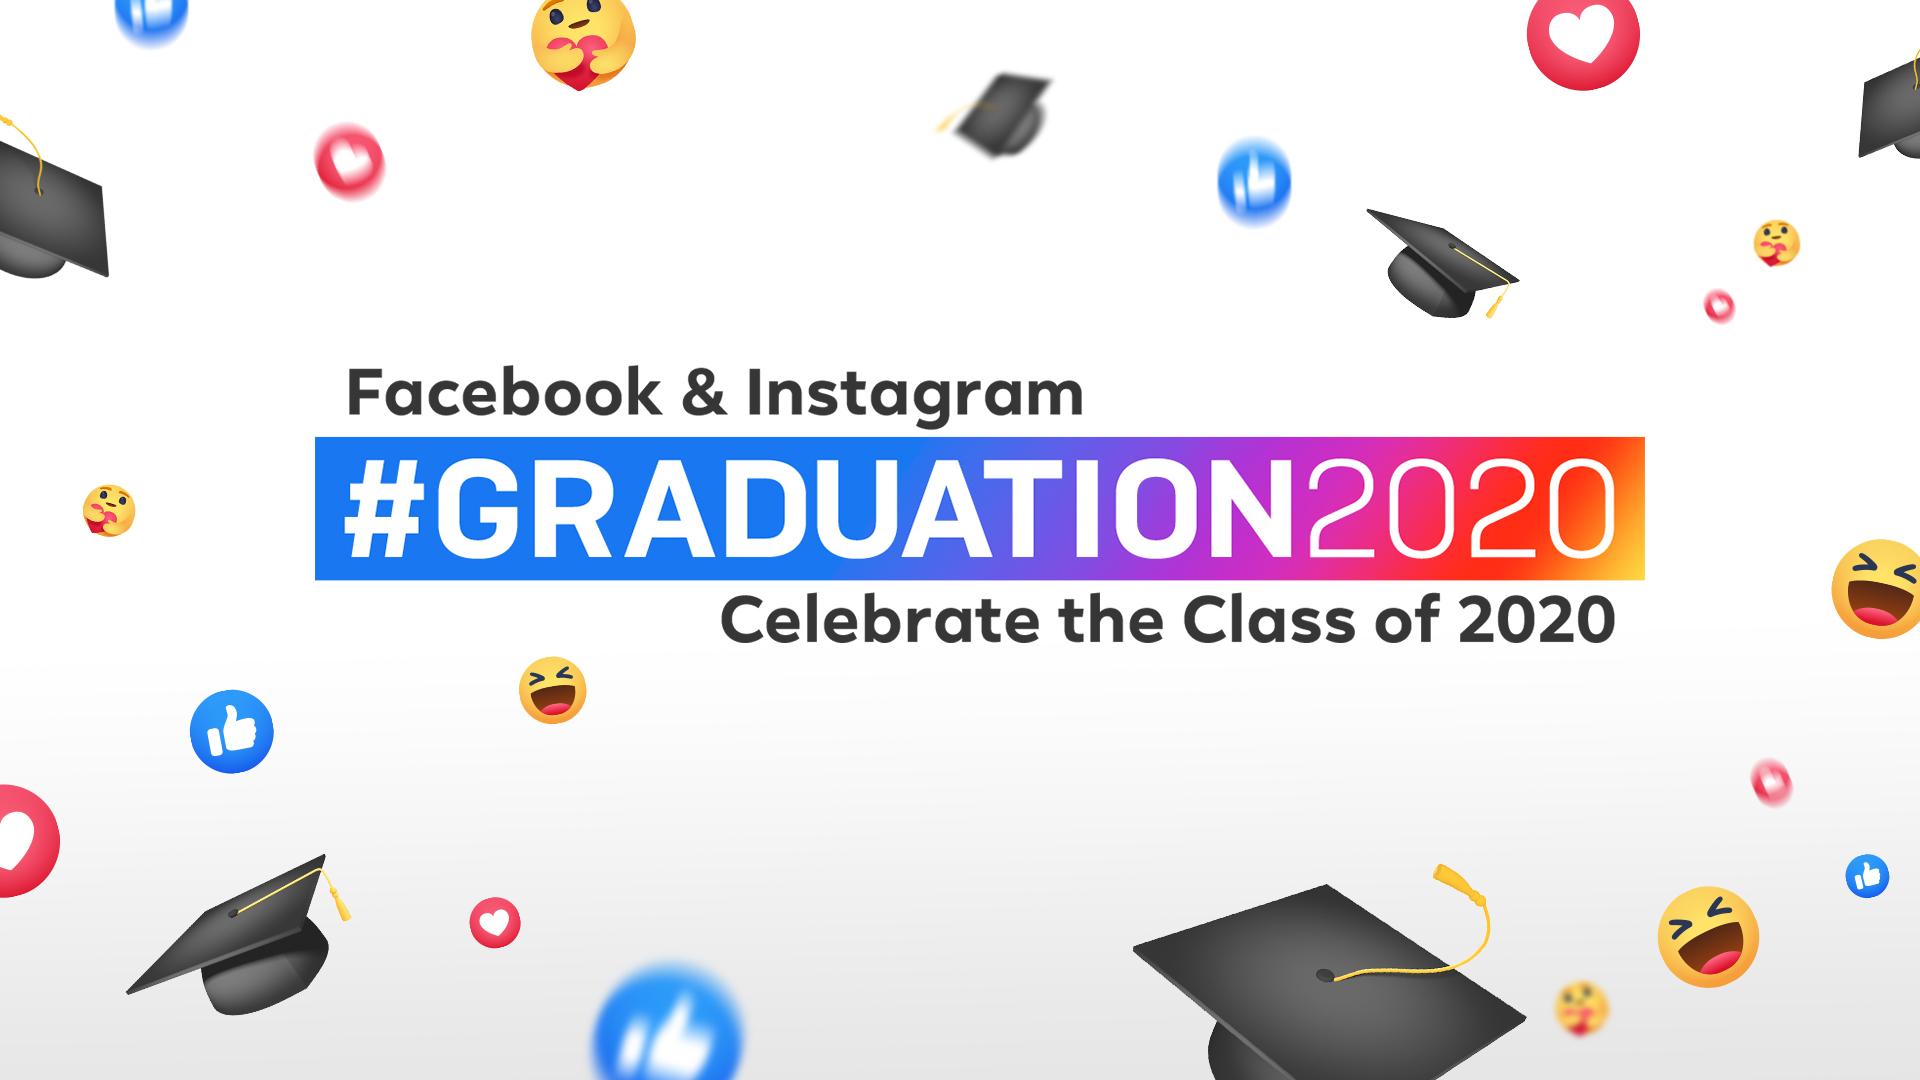 Facebook and Instagram launch a week of grad-themed events and features